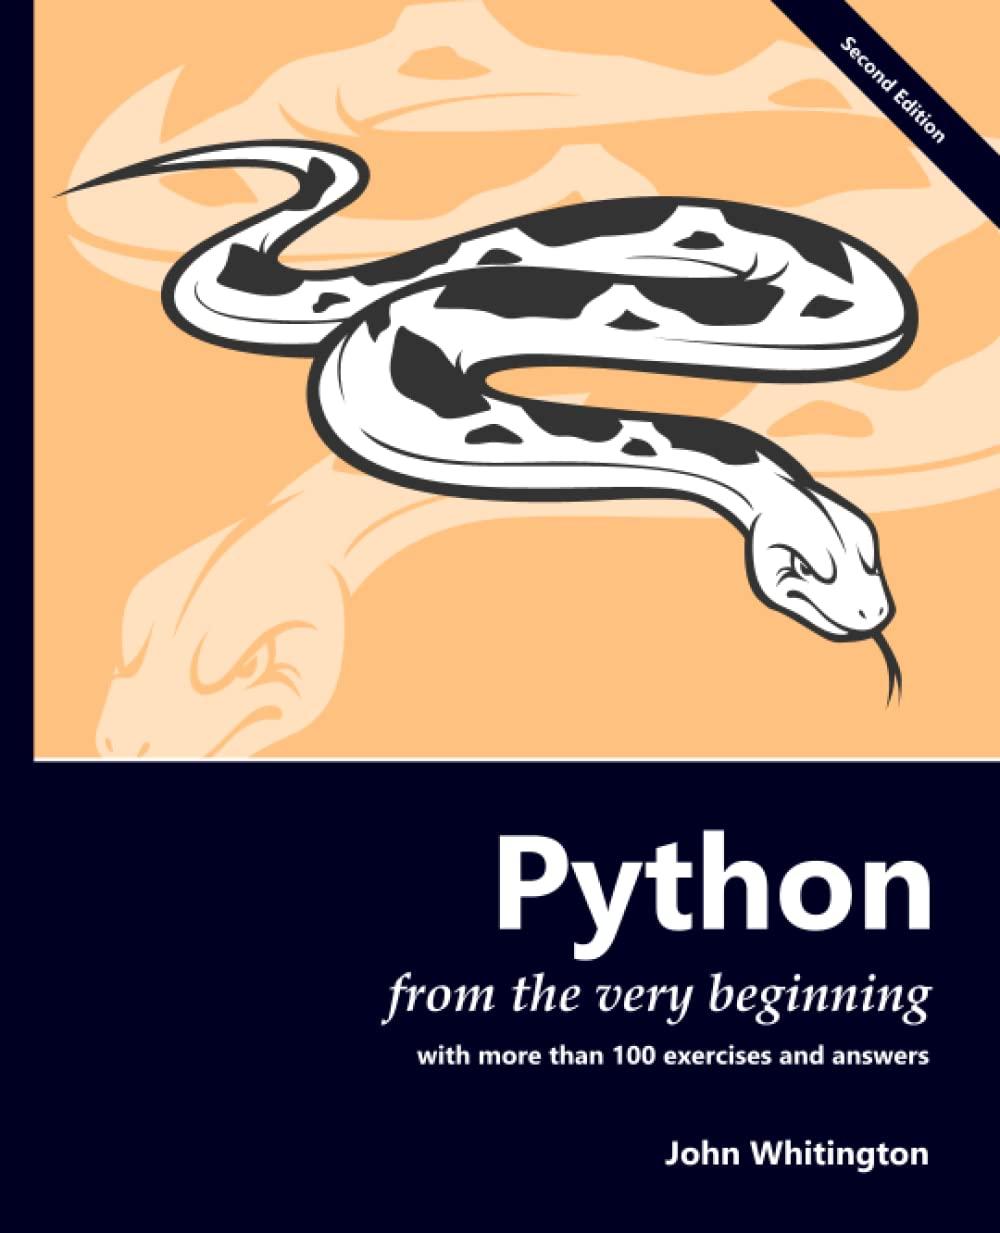 python from the very beginning with 100 exercises and answers 2nd edition john whitington 0957671156,